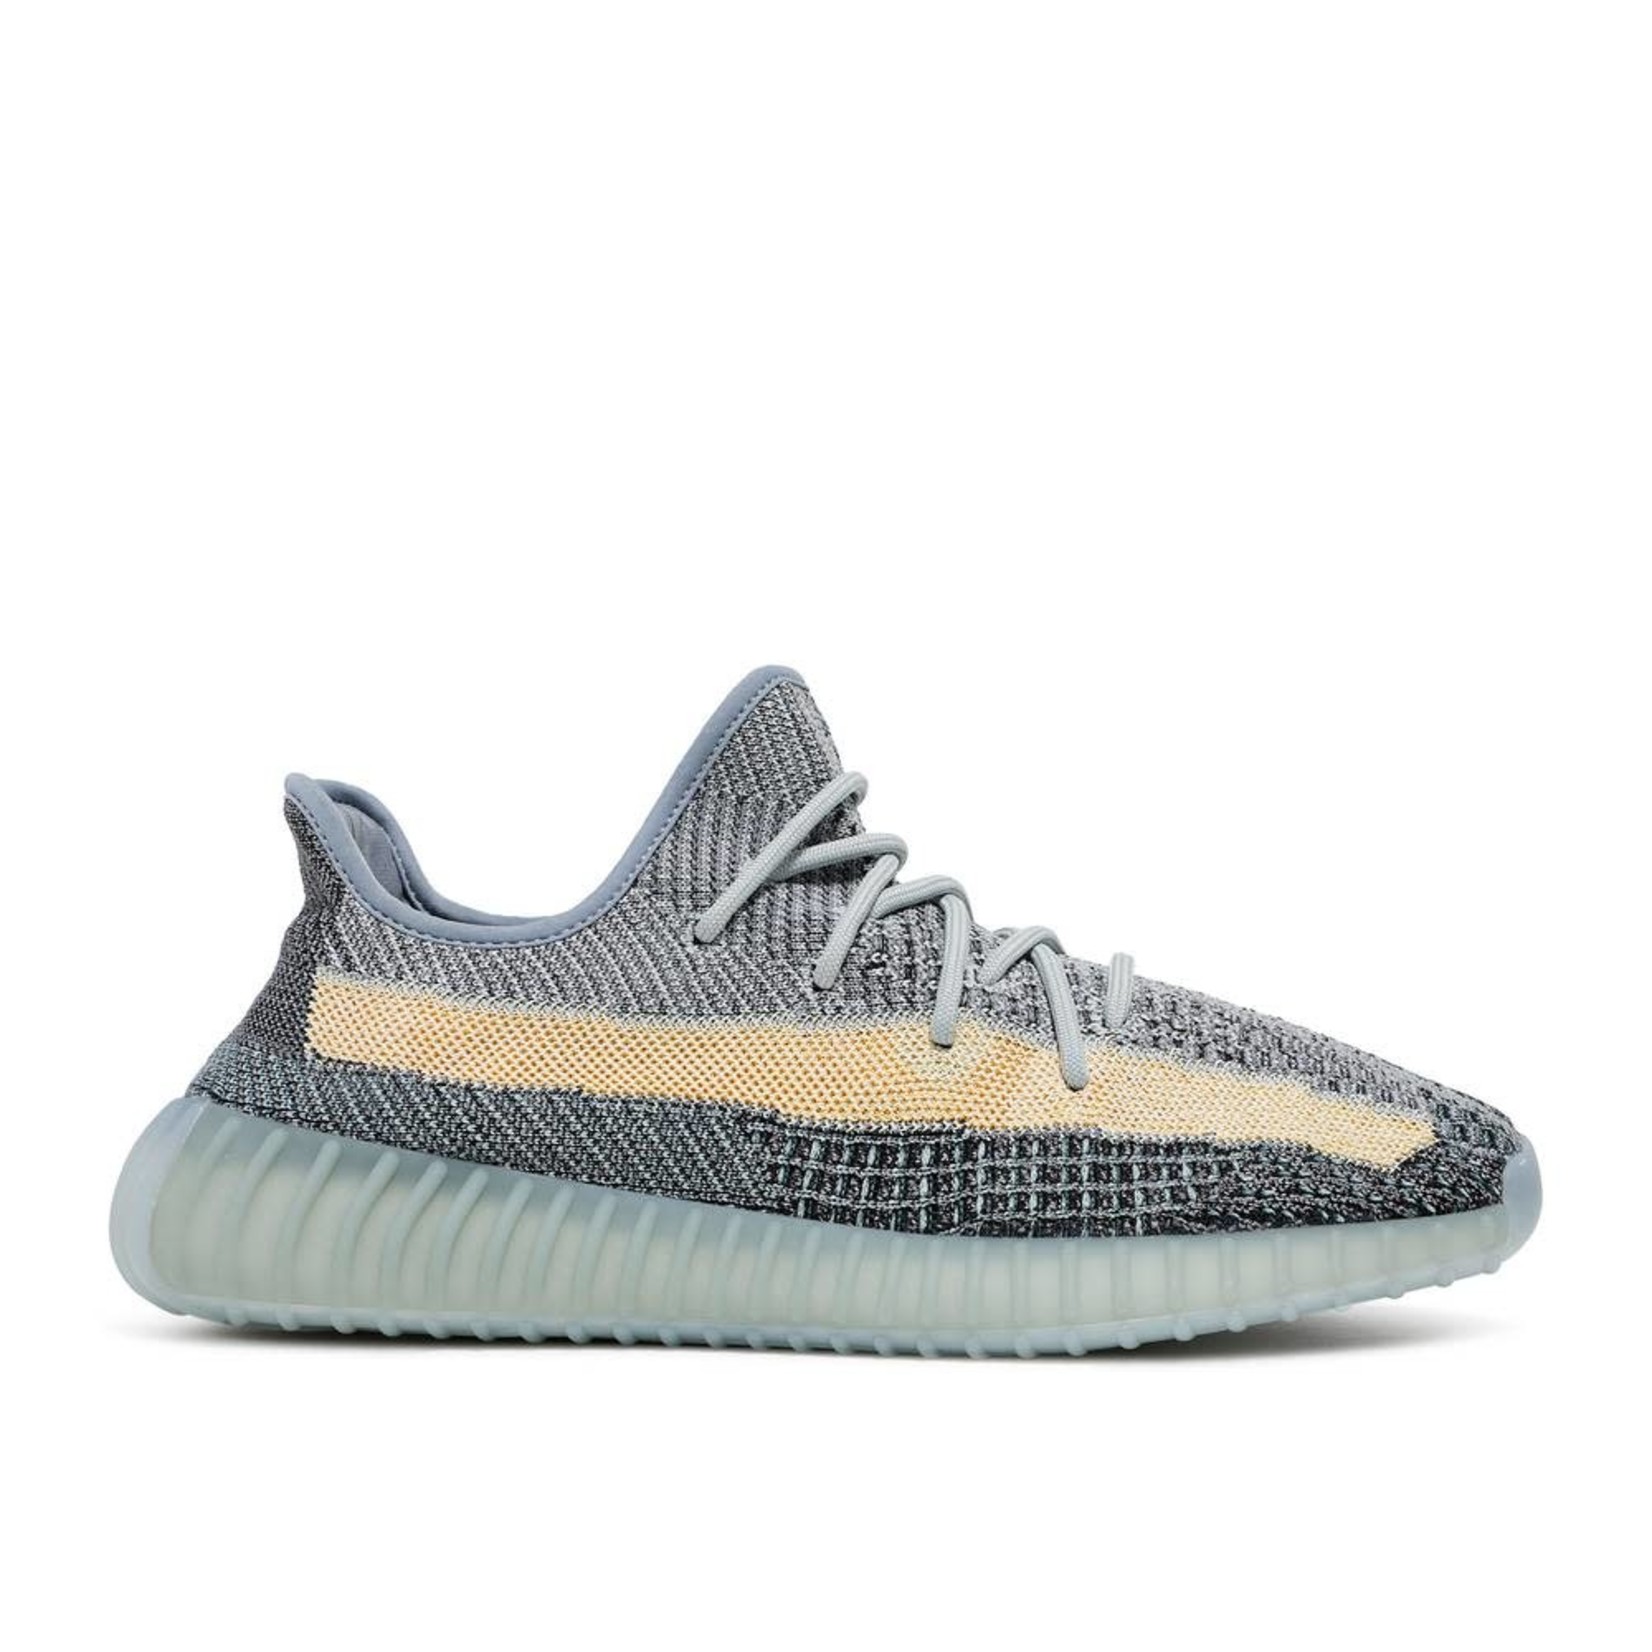 Adidas adidas Yeezy Boost 350 V2 Ash Blue Size 6, DS BRAND NEW